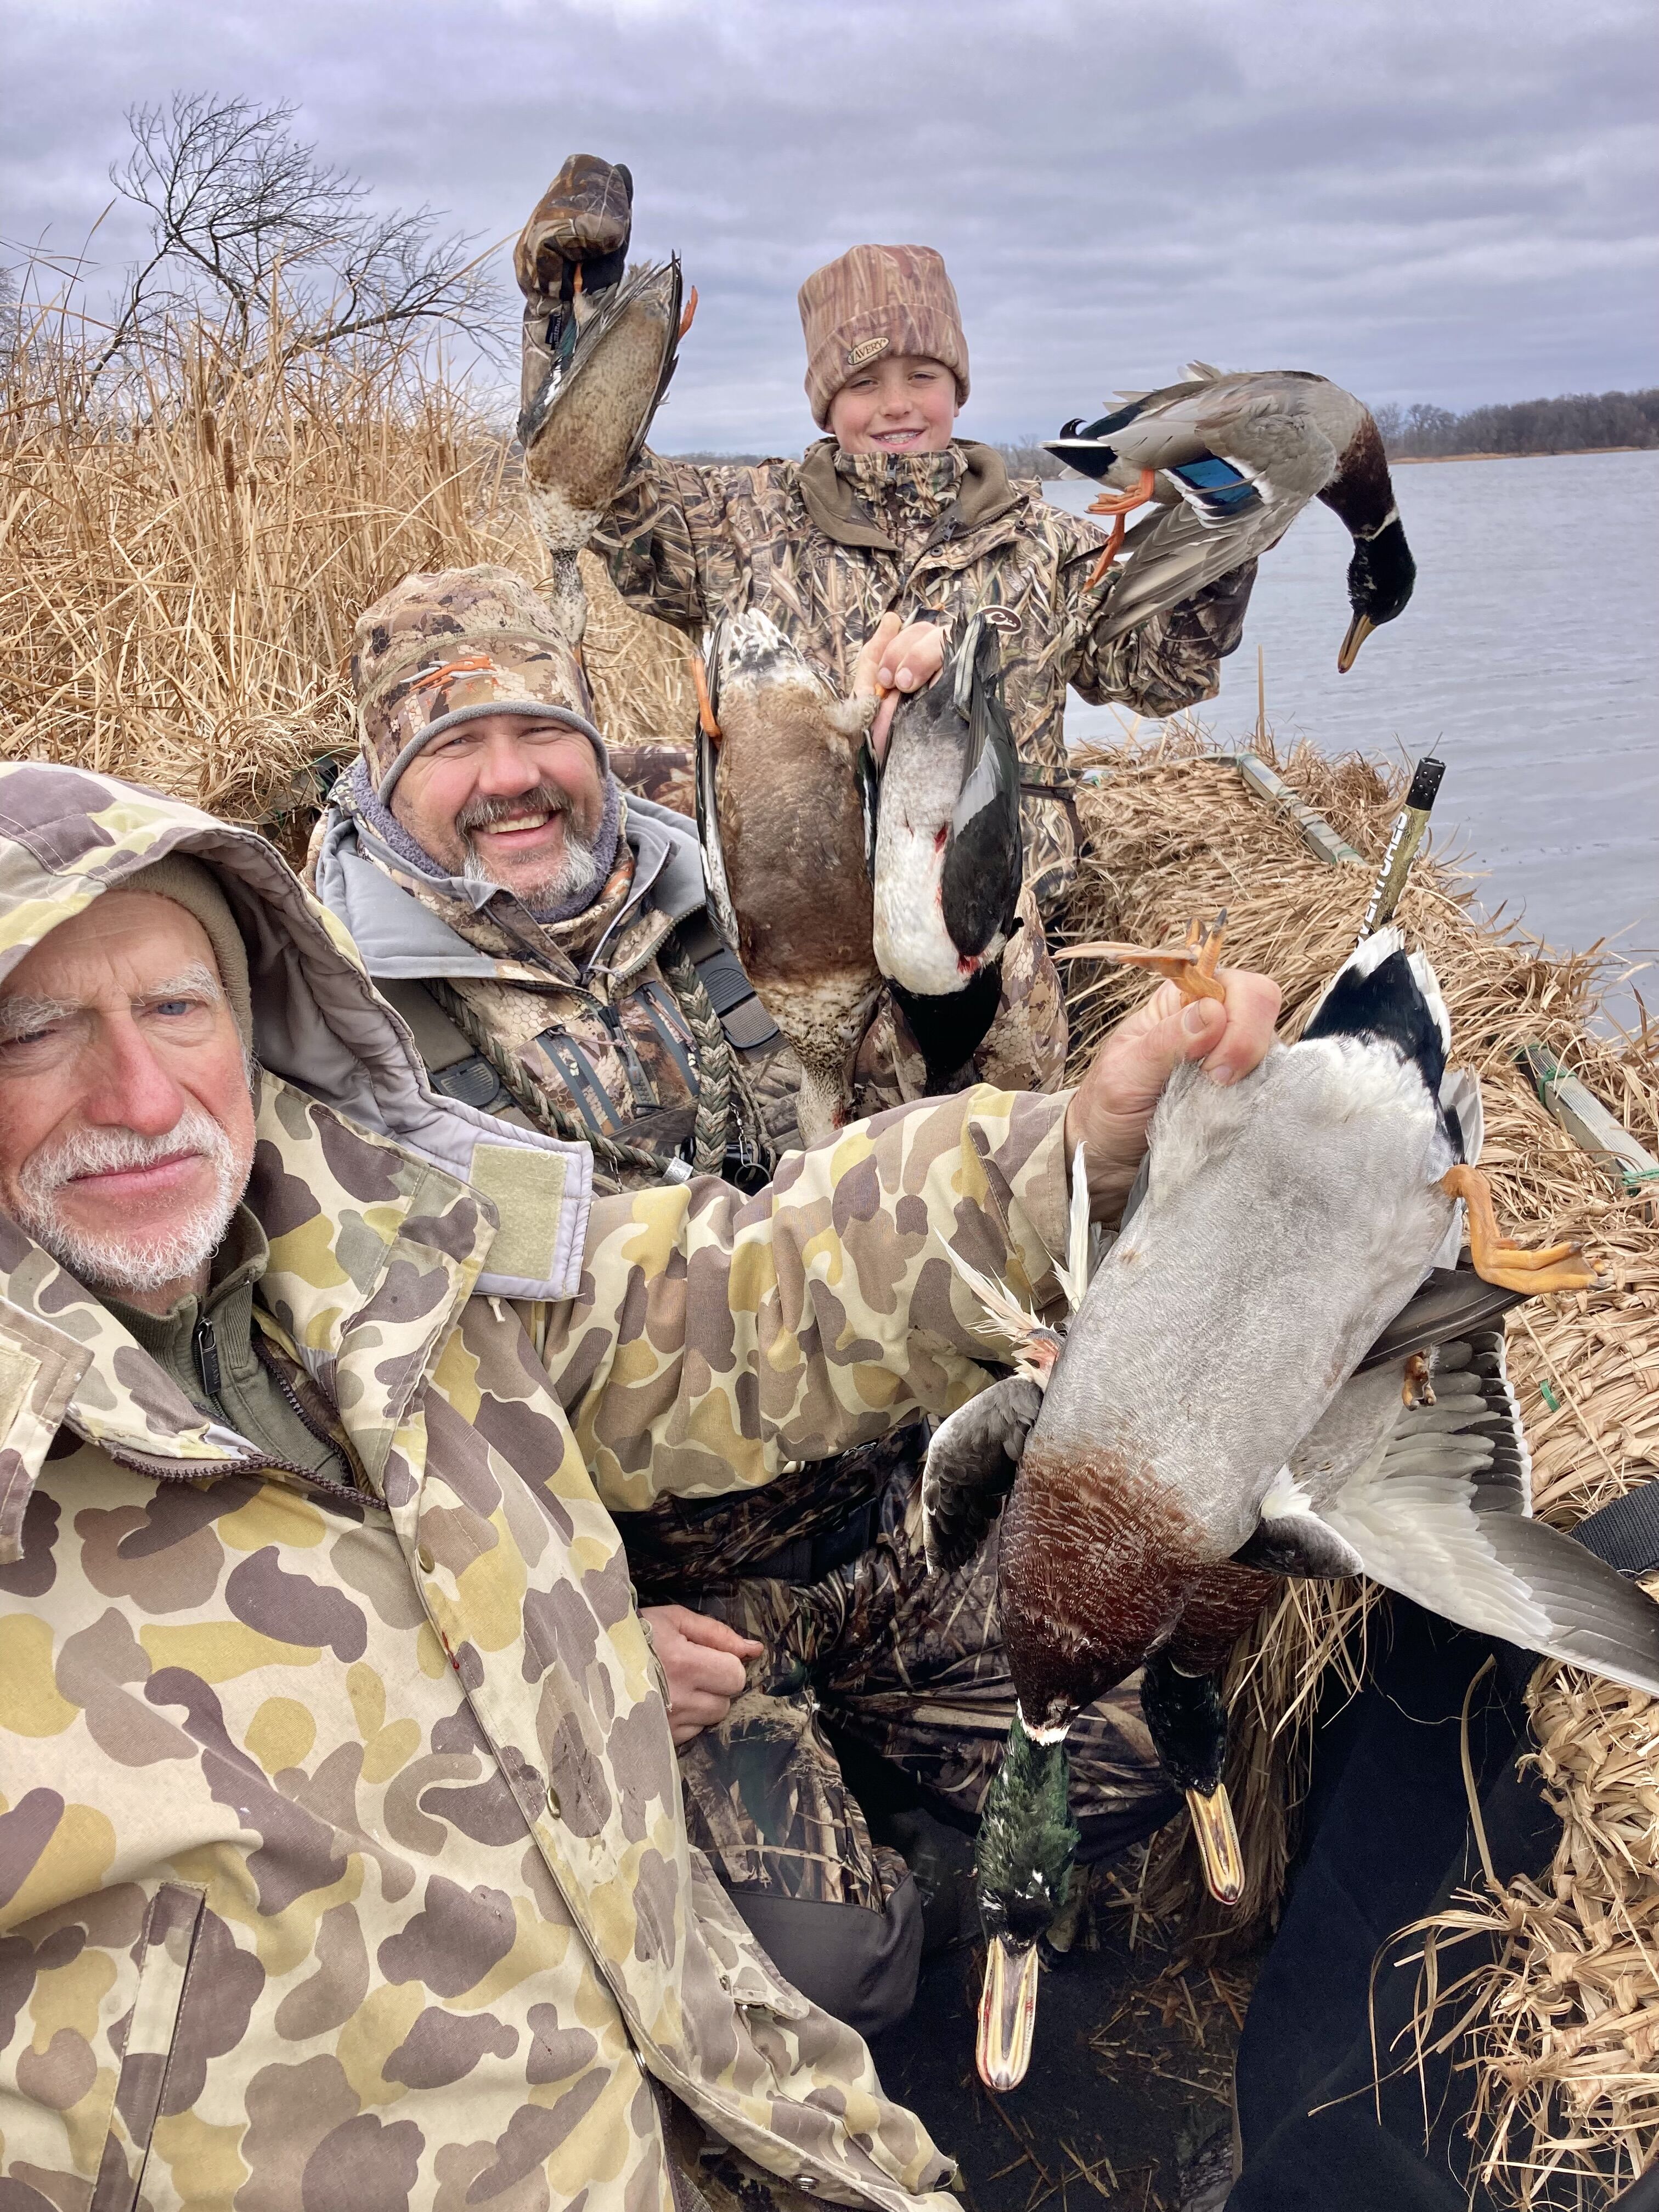 Performance Hunting Hats  Combat Waterfowl – tagged committed